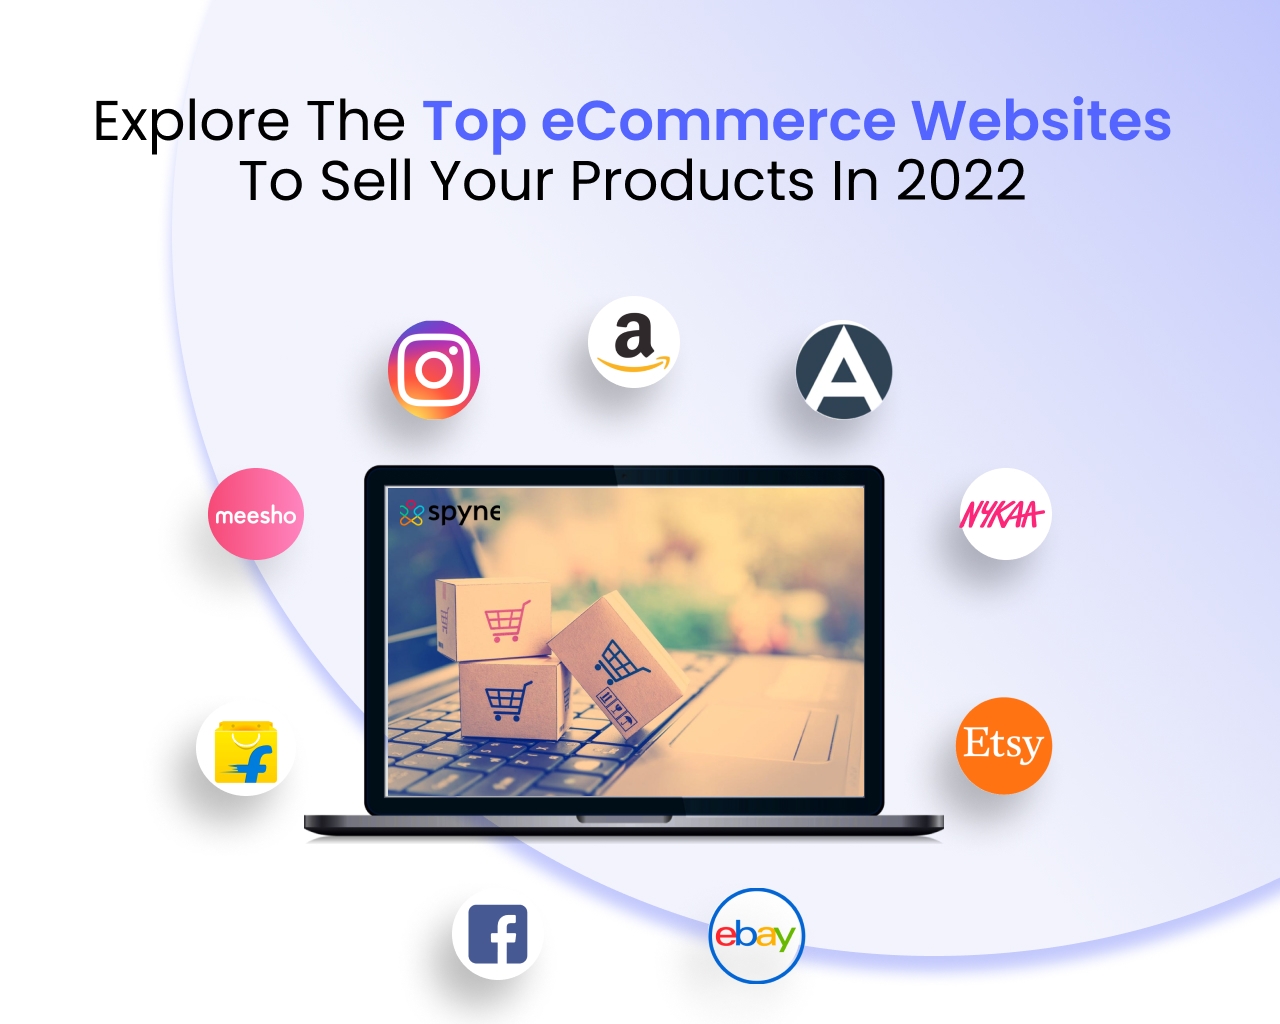 Top ecommerce website to sell your products in 2022